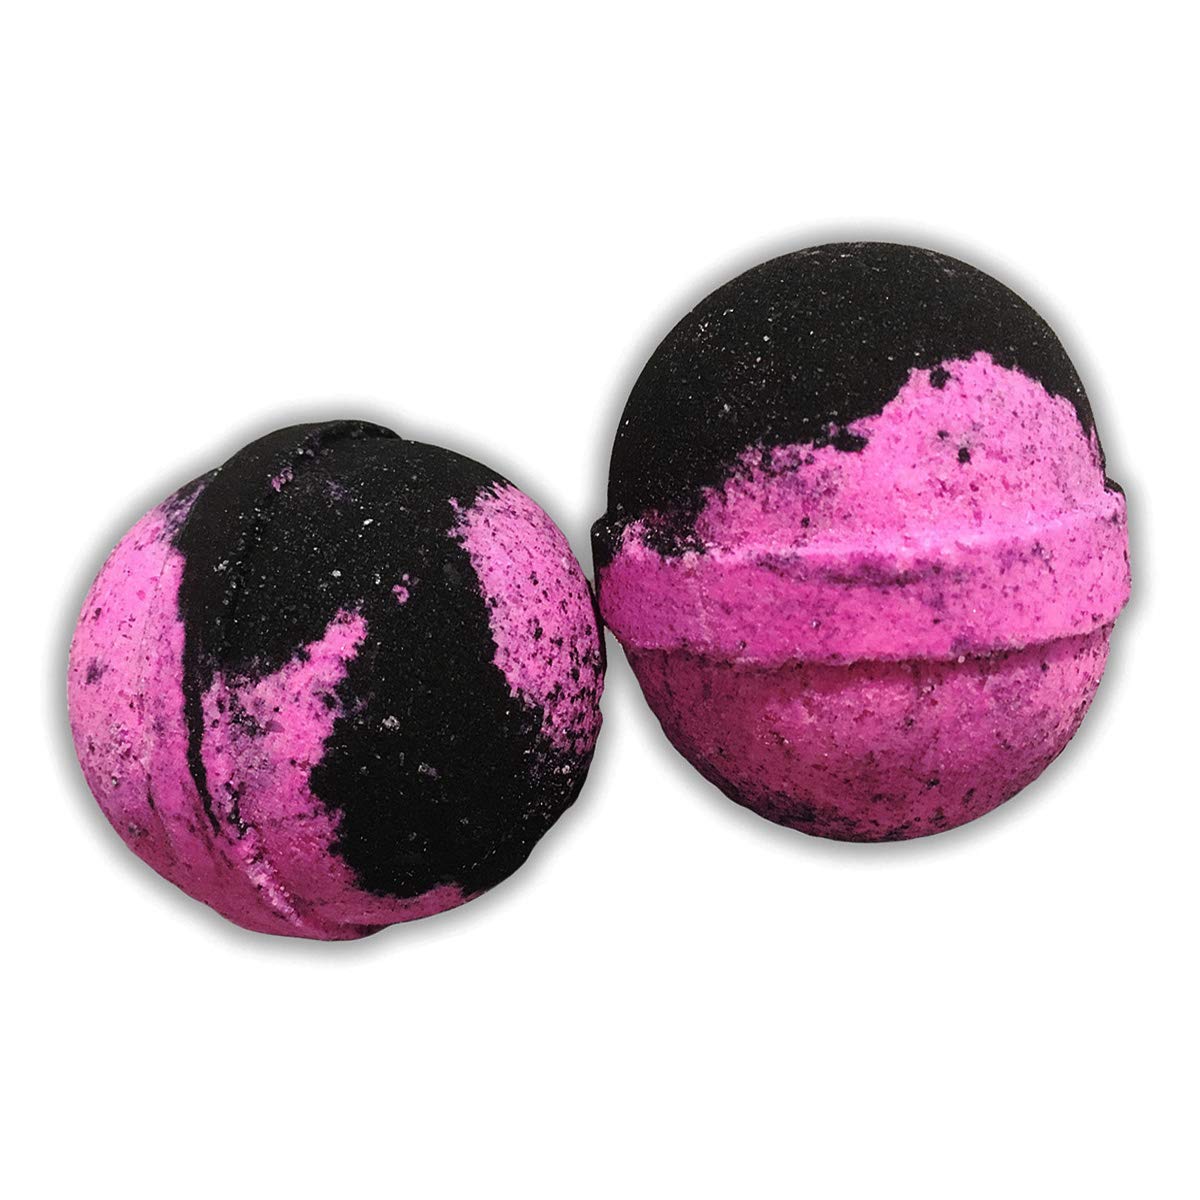 WTF Bath Bombs - XL Bath Fizzers for Women - Giant, pink and black, Handcrafted, 2 pk